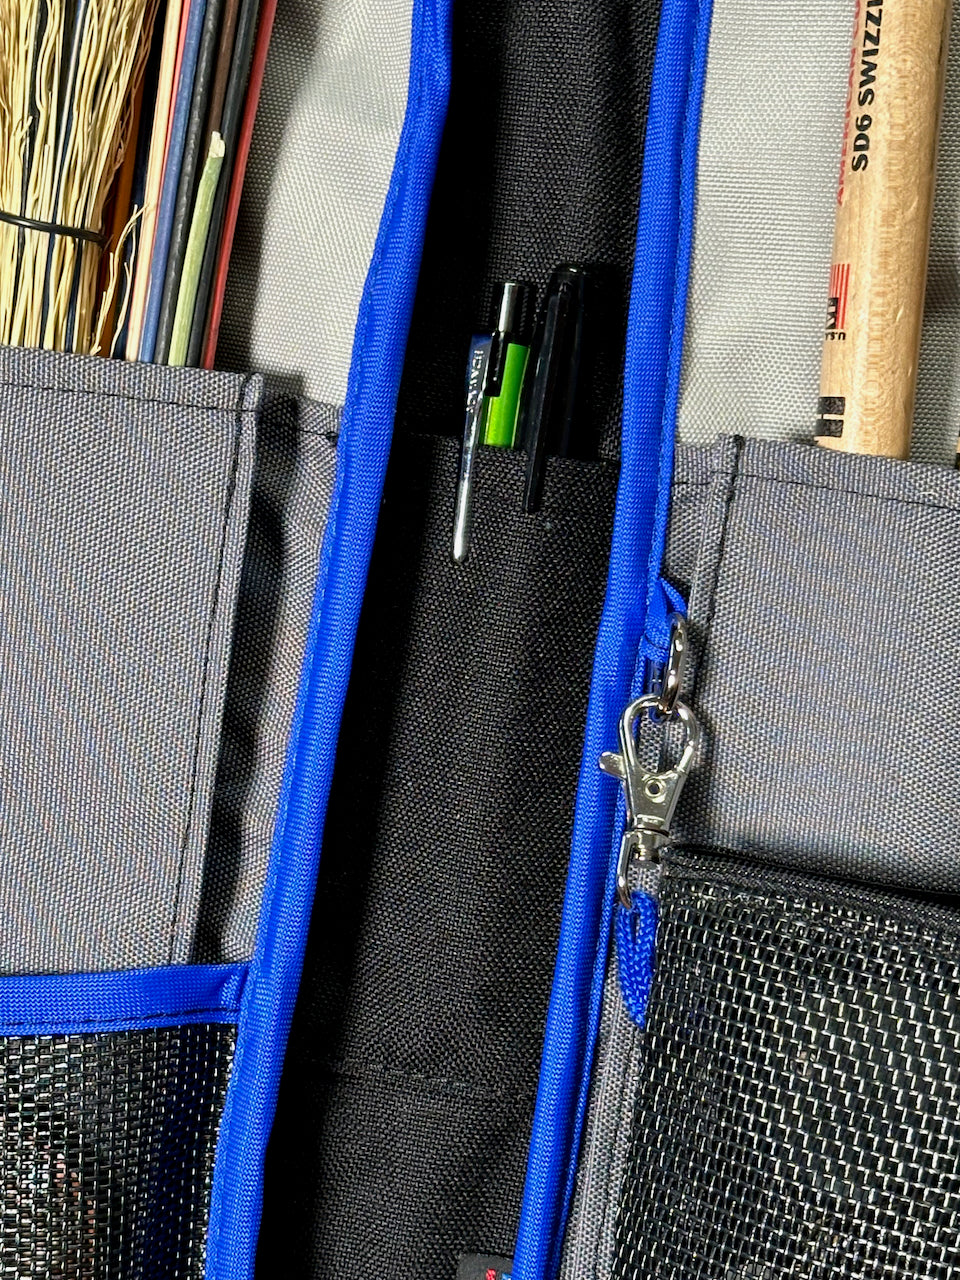 Deluxe Stick Bag